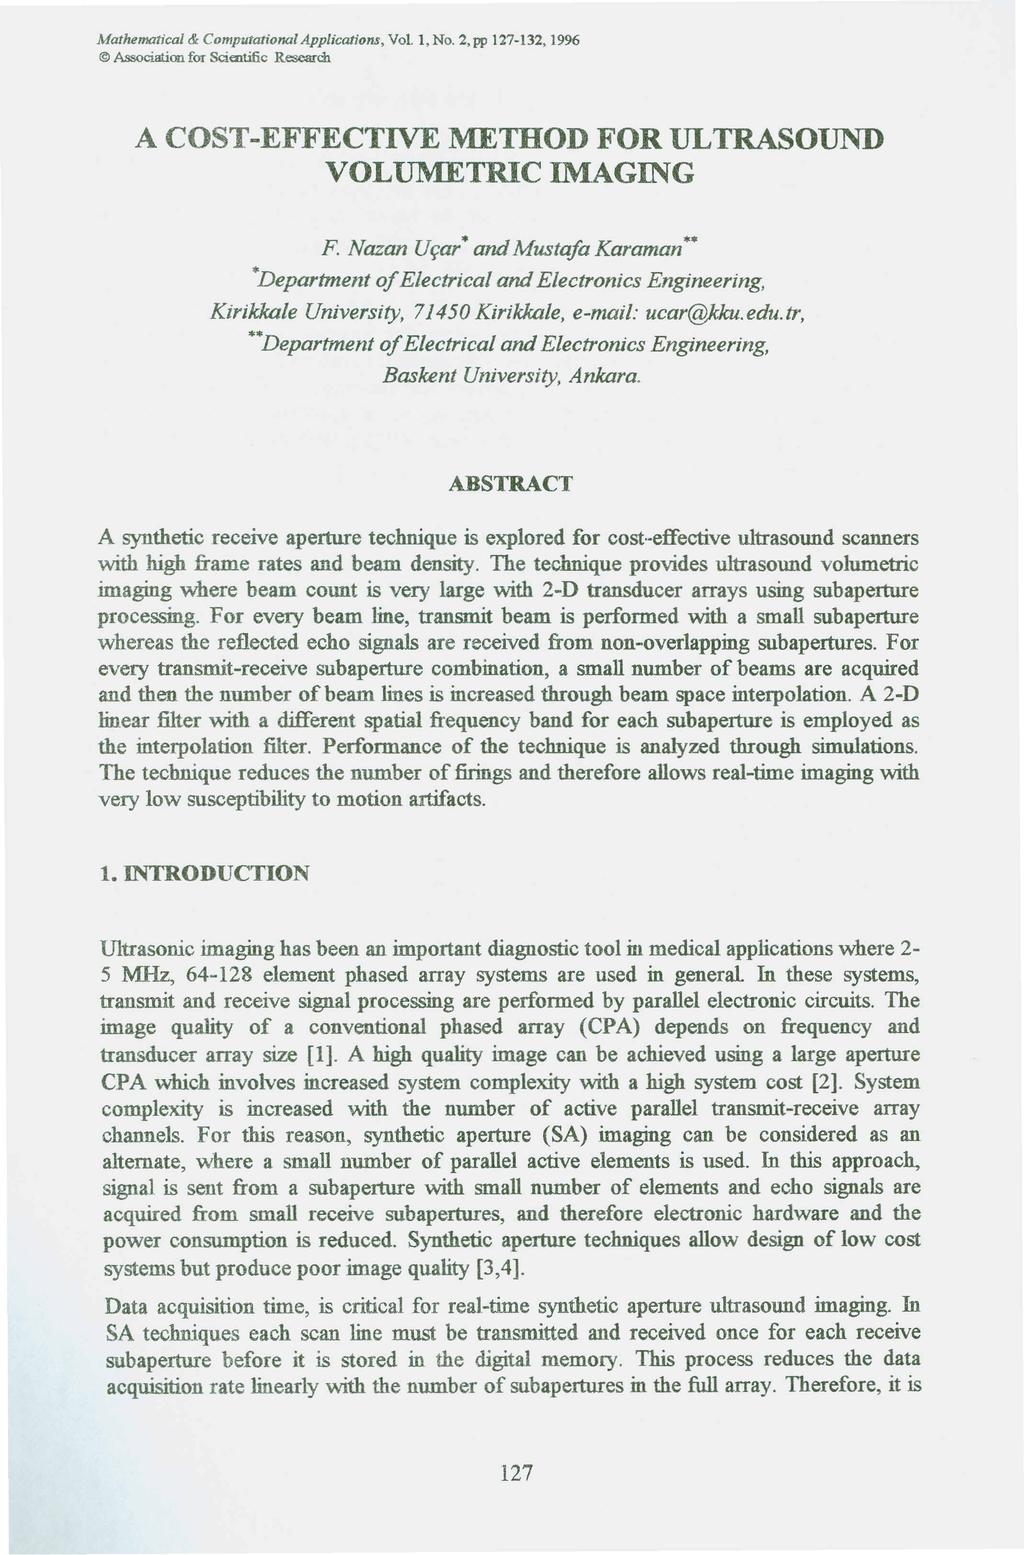 Mathematical & Computational Applications, Voll, No. 2,pp 127-132, 1996 Association for Scientific ReseardJ. A COST-EFFECTIVE METHOD FOR ULTRASOUND VOLUMETRIC IMAGING F.